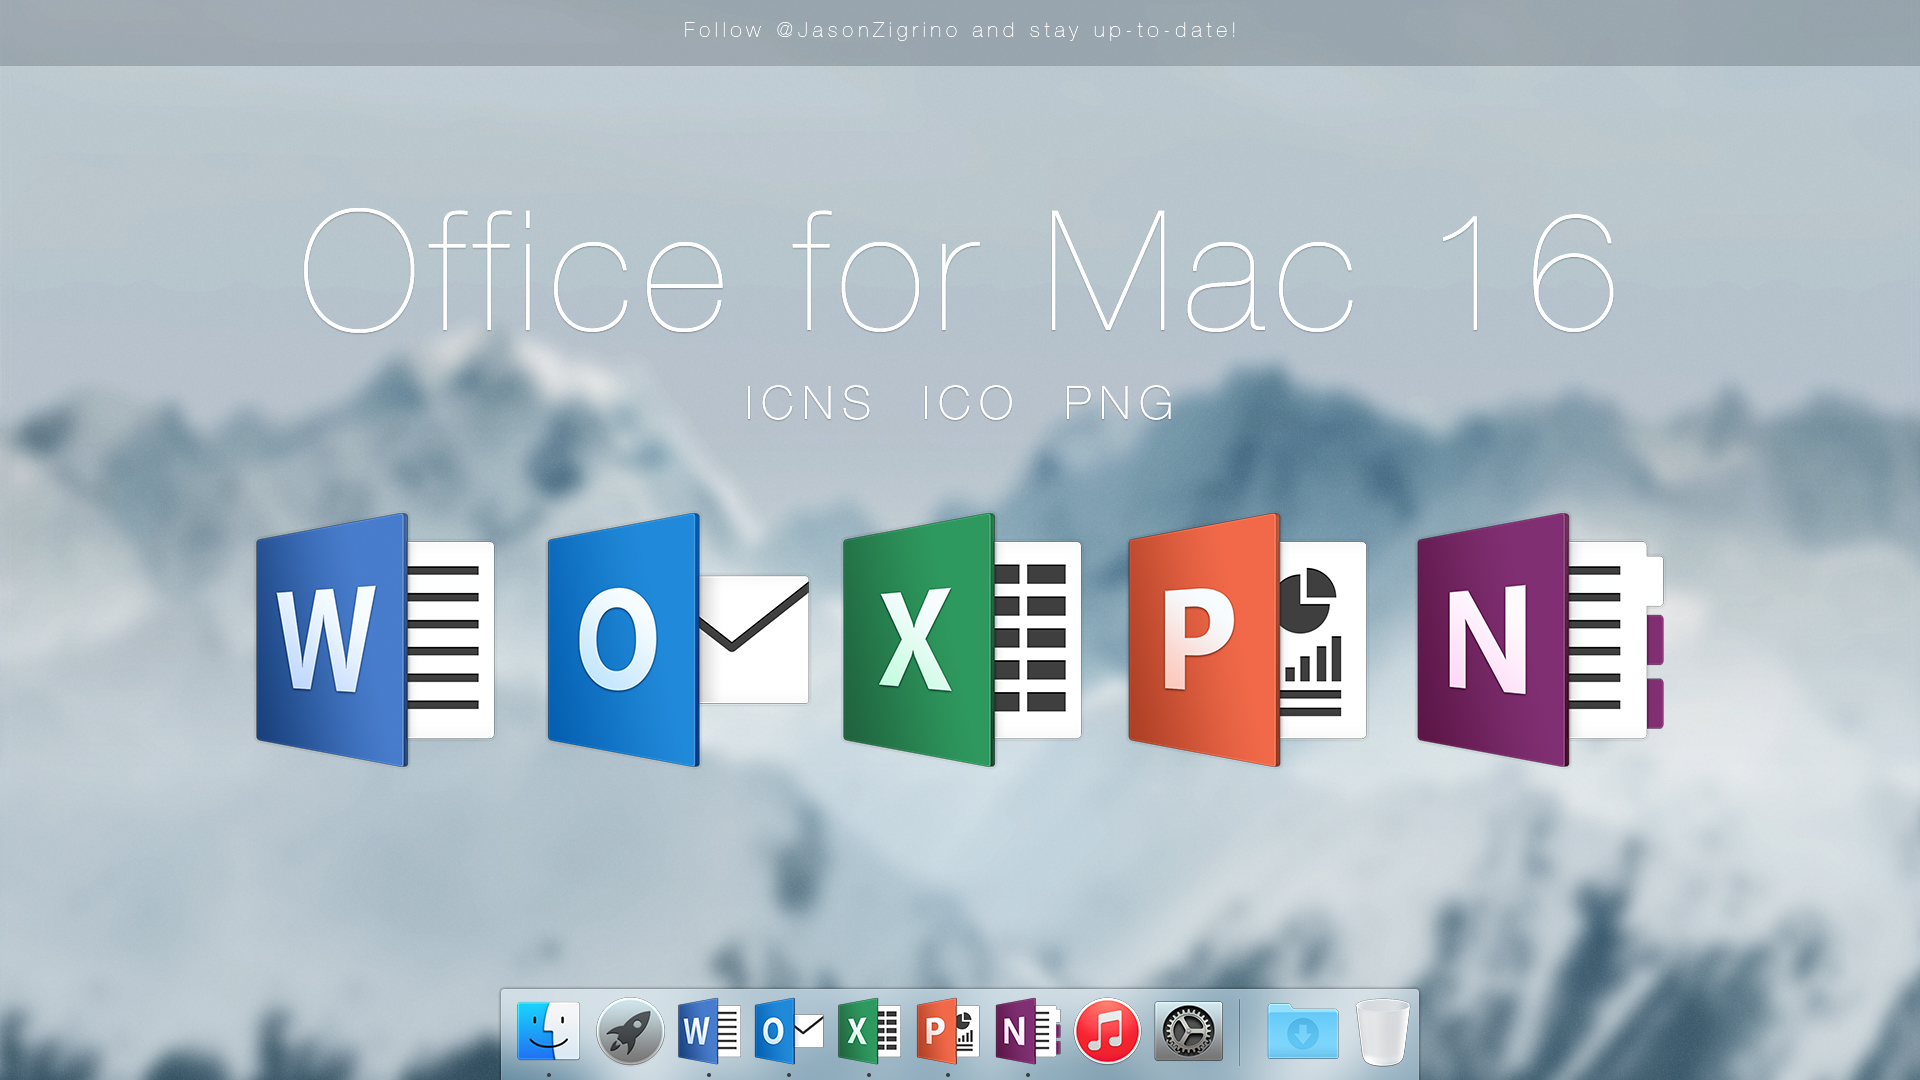 microsoft office versions for mac